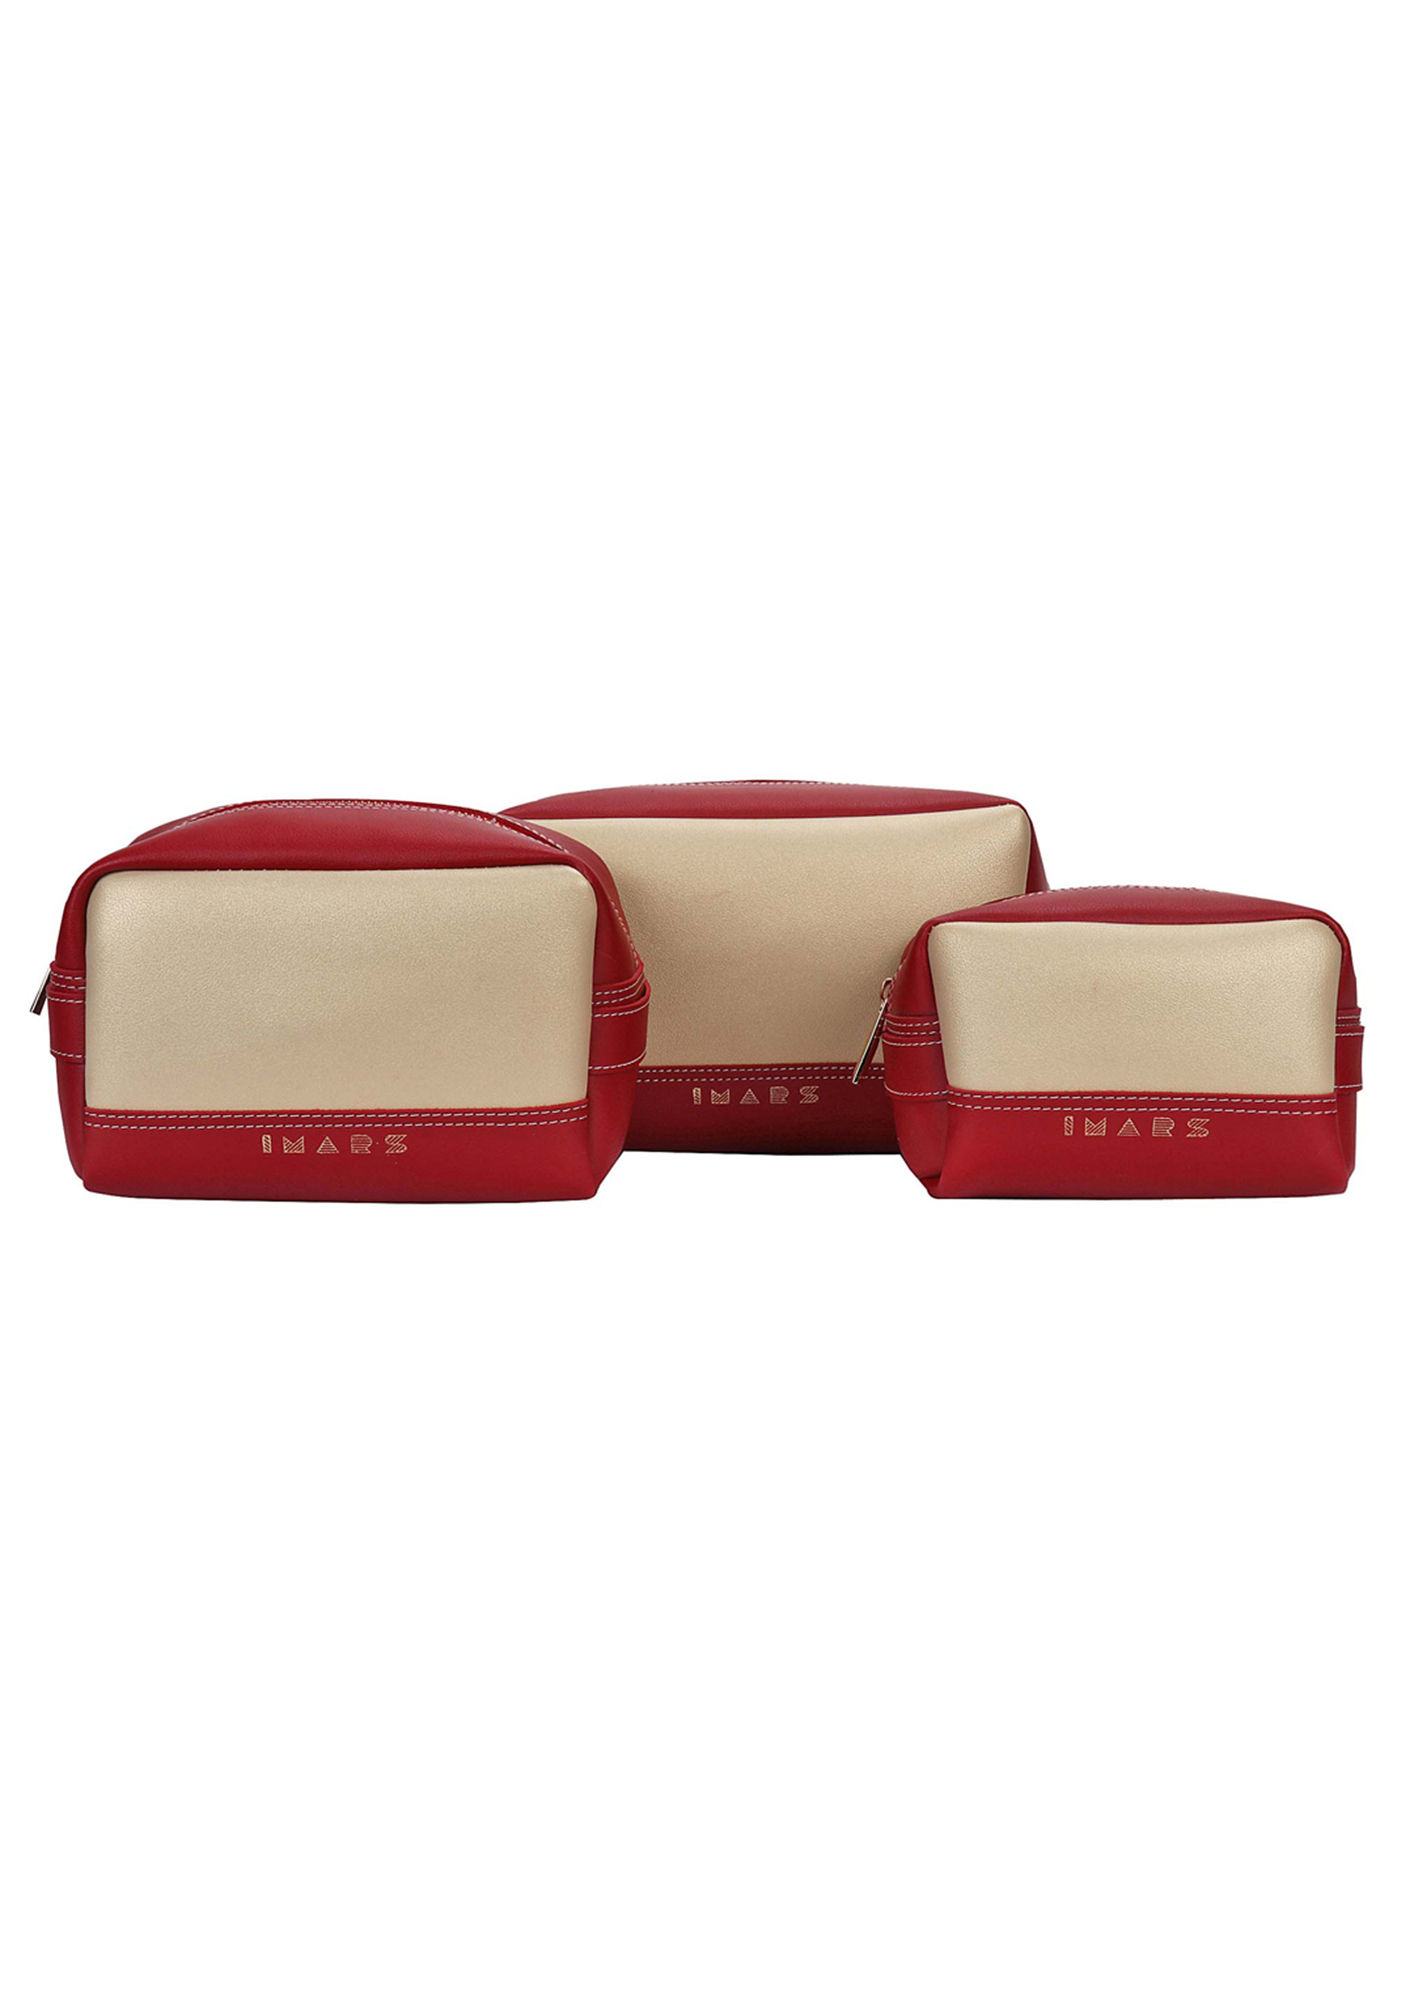 Buy Red Travel Kit Online In India At Best Prices